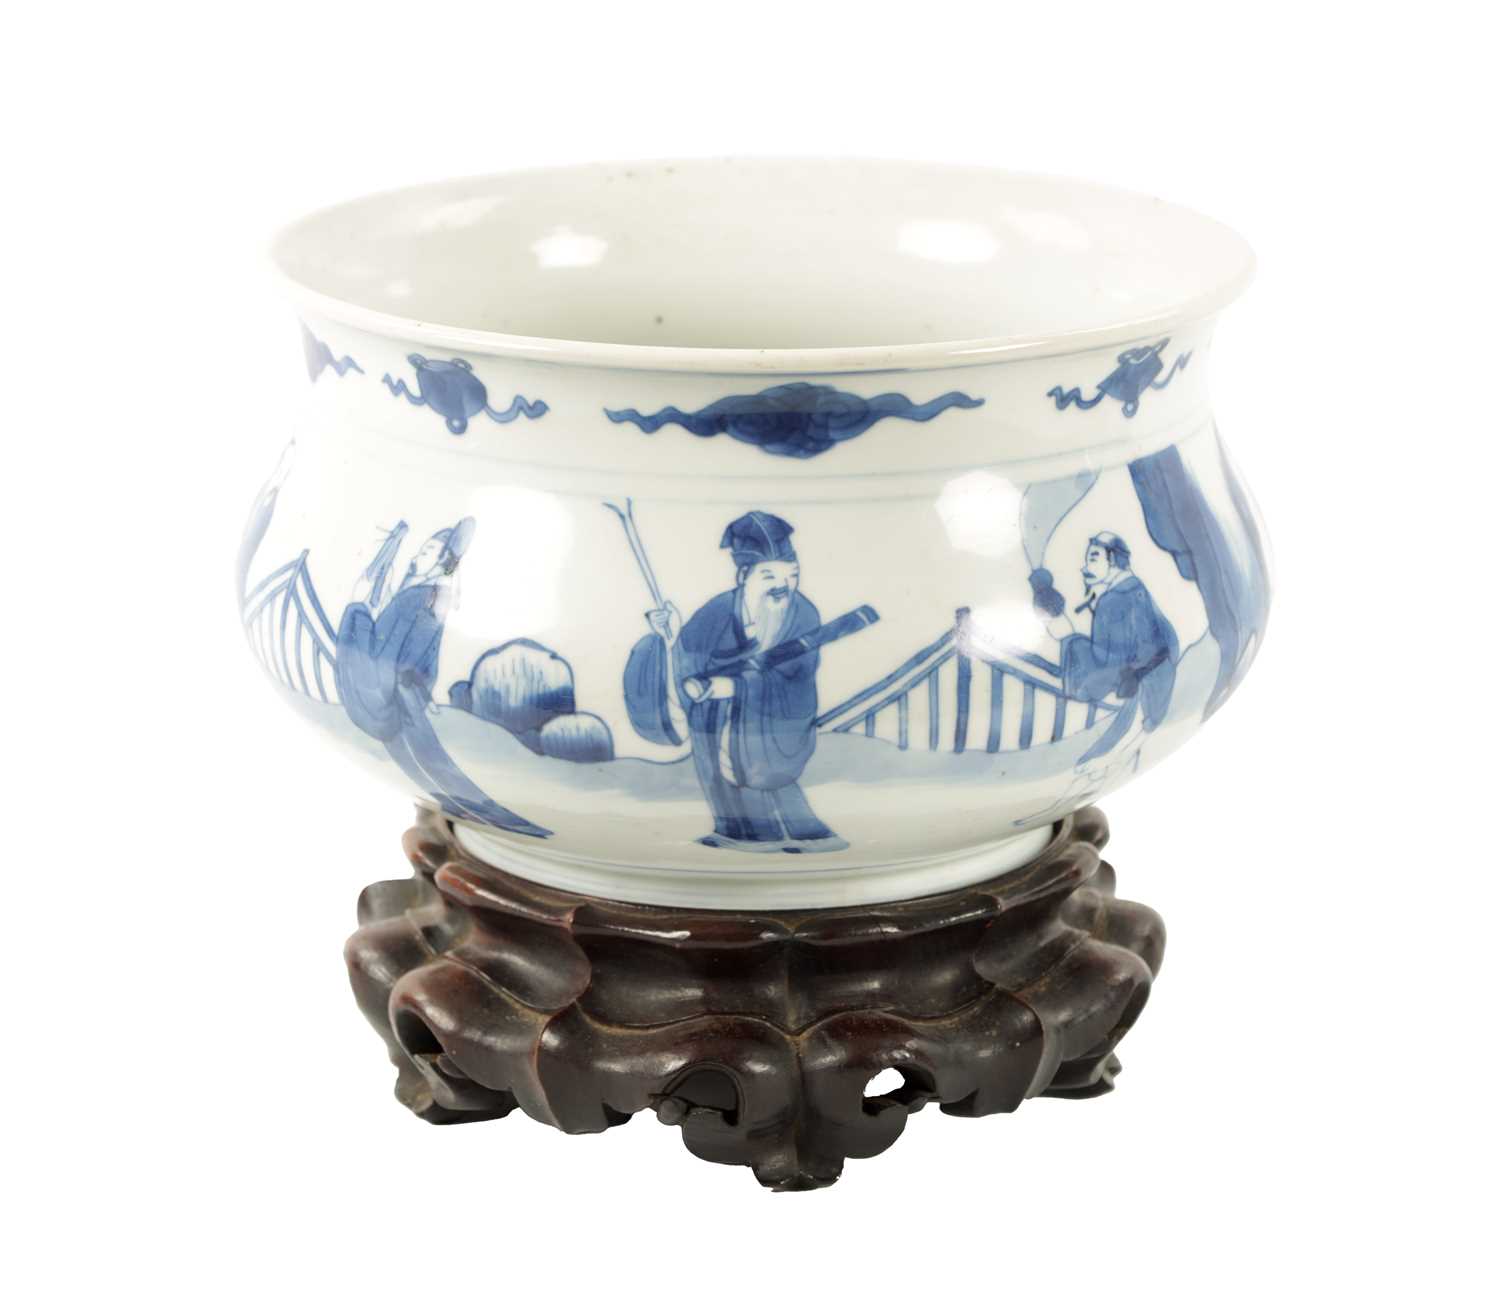 A CHINESE MING DYNASTY BLUE AND WHITE PORCELAIN CENSER ON HARDWOOD STAND